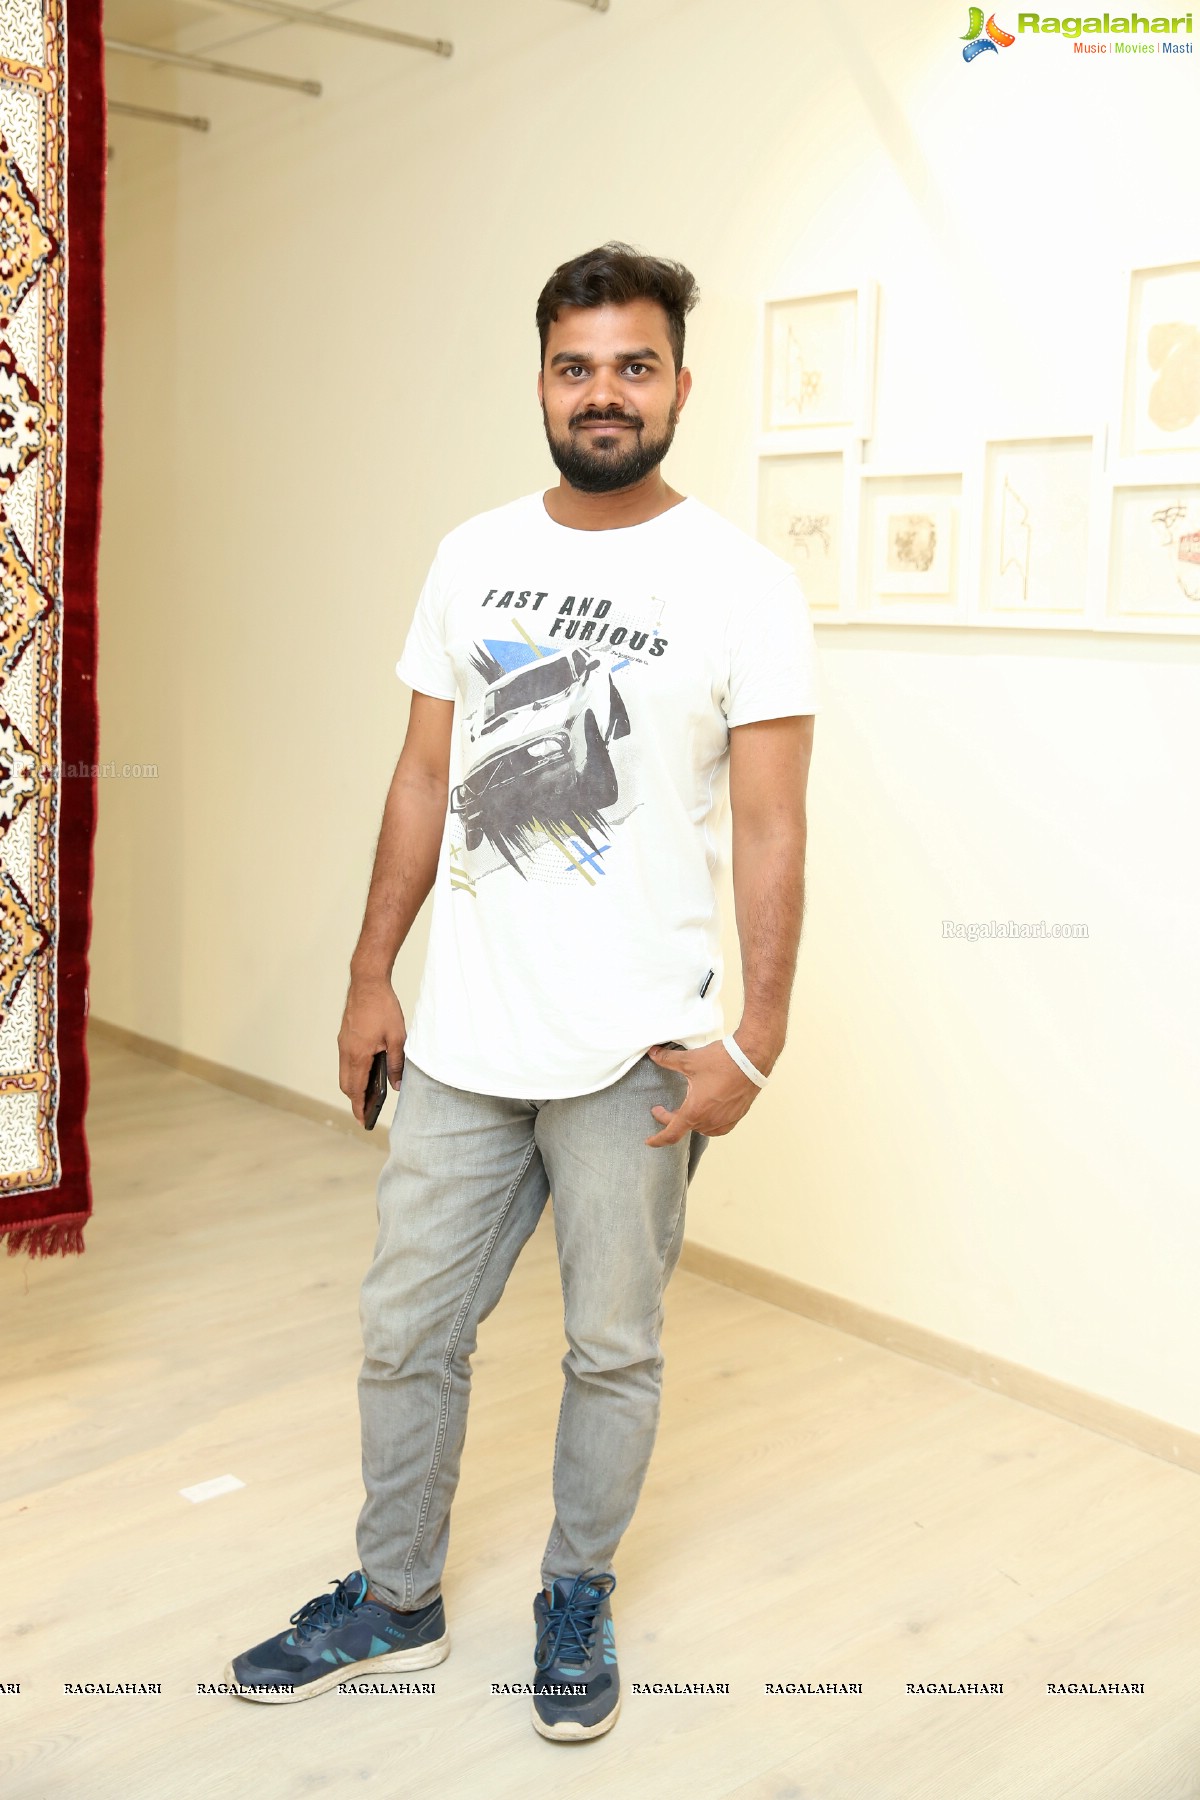 Convergence: The Untouched Layer - Kalakriti Art Gallery